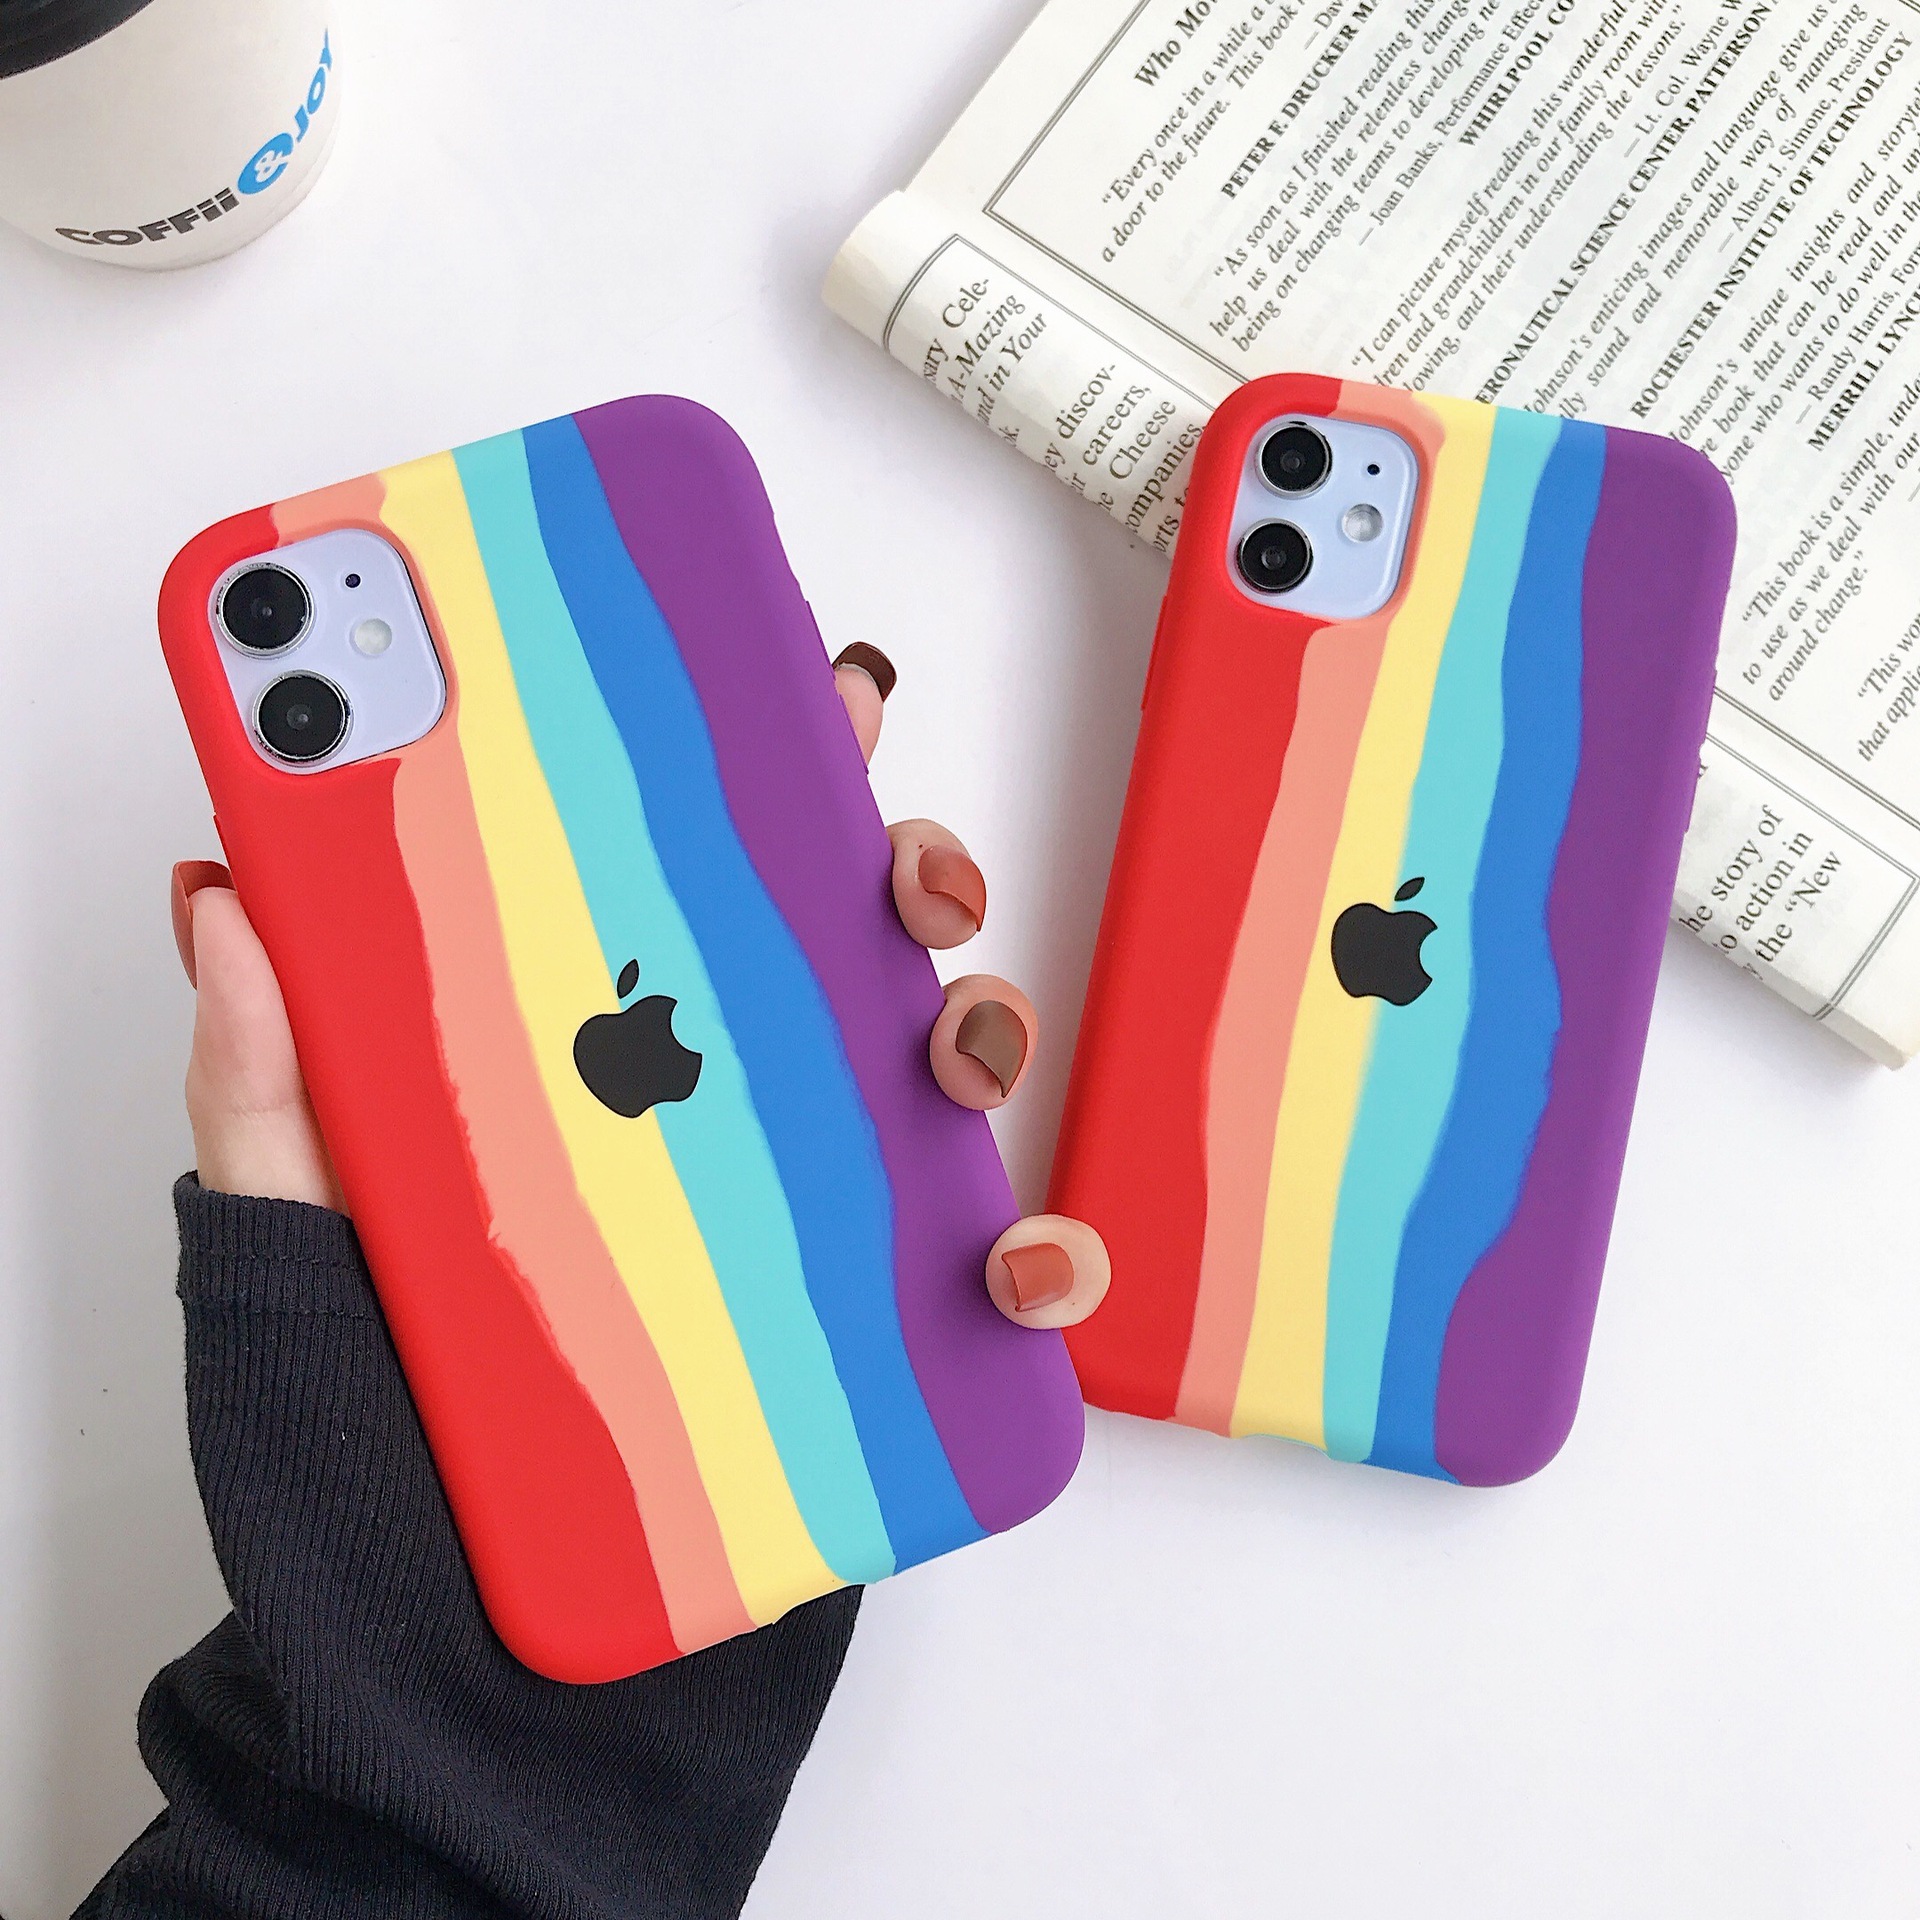 Apple Iphone Silicone Case For All Models Iplace City Kenya